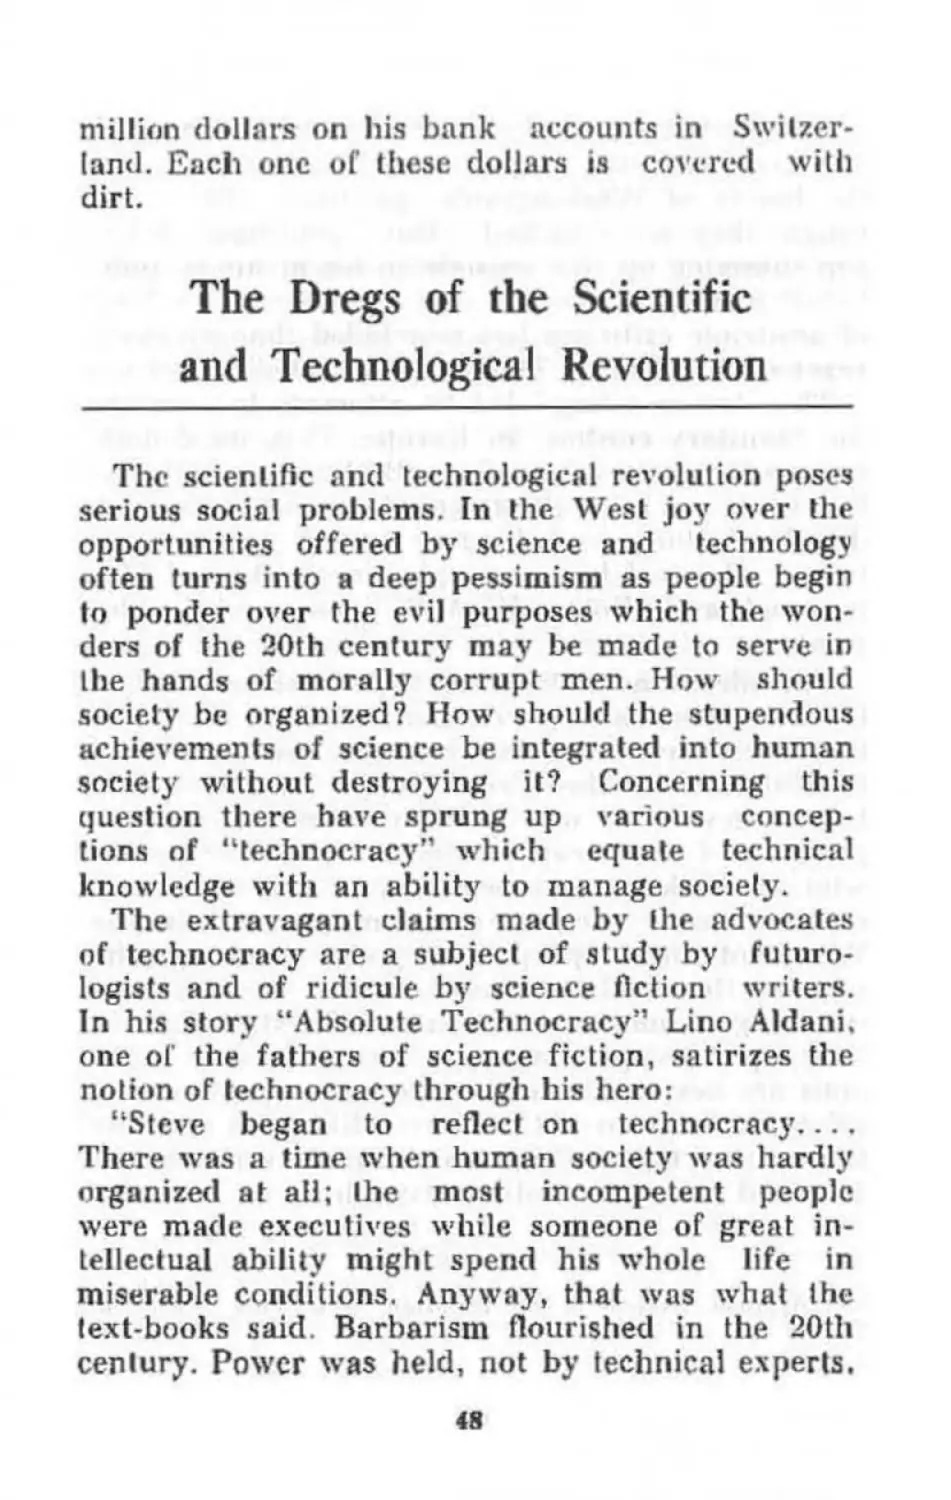 The Dregs of the Scientific and Technological Revolution